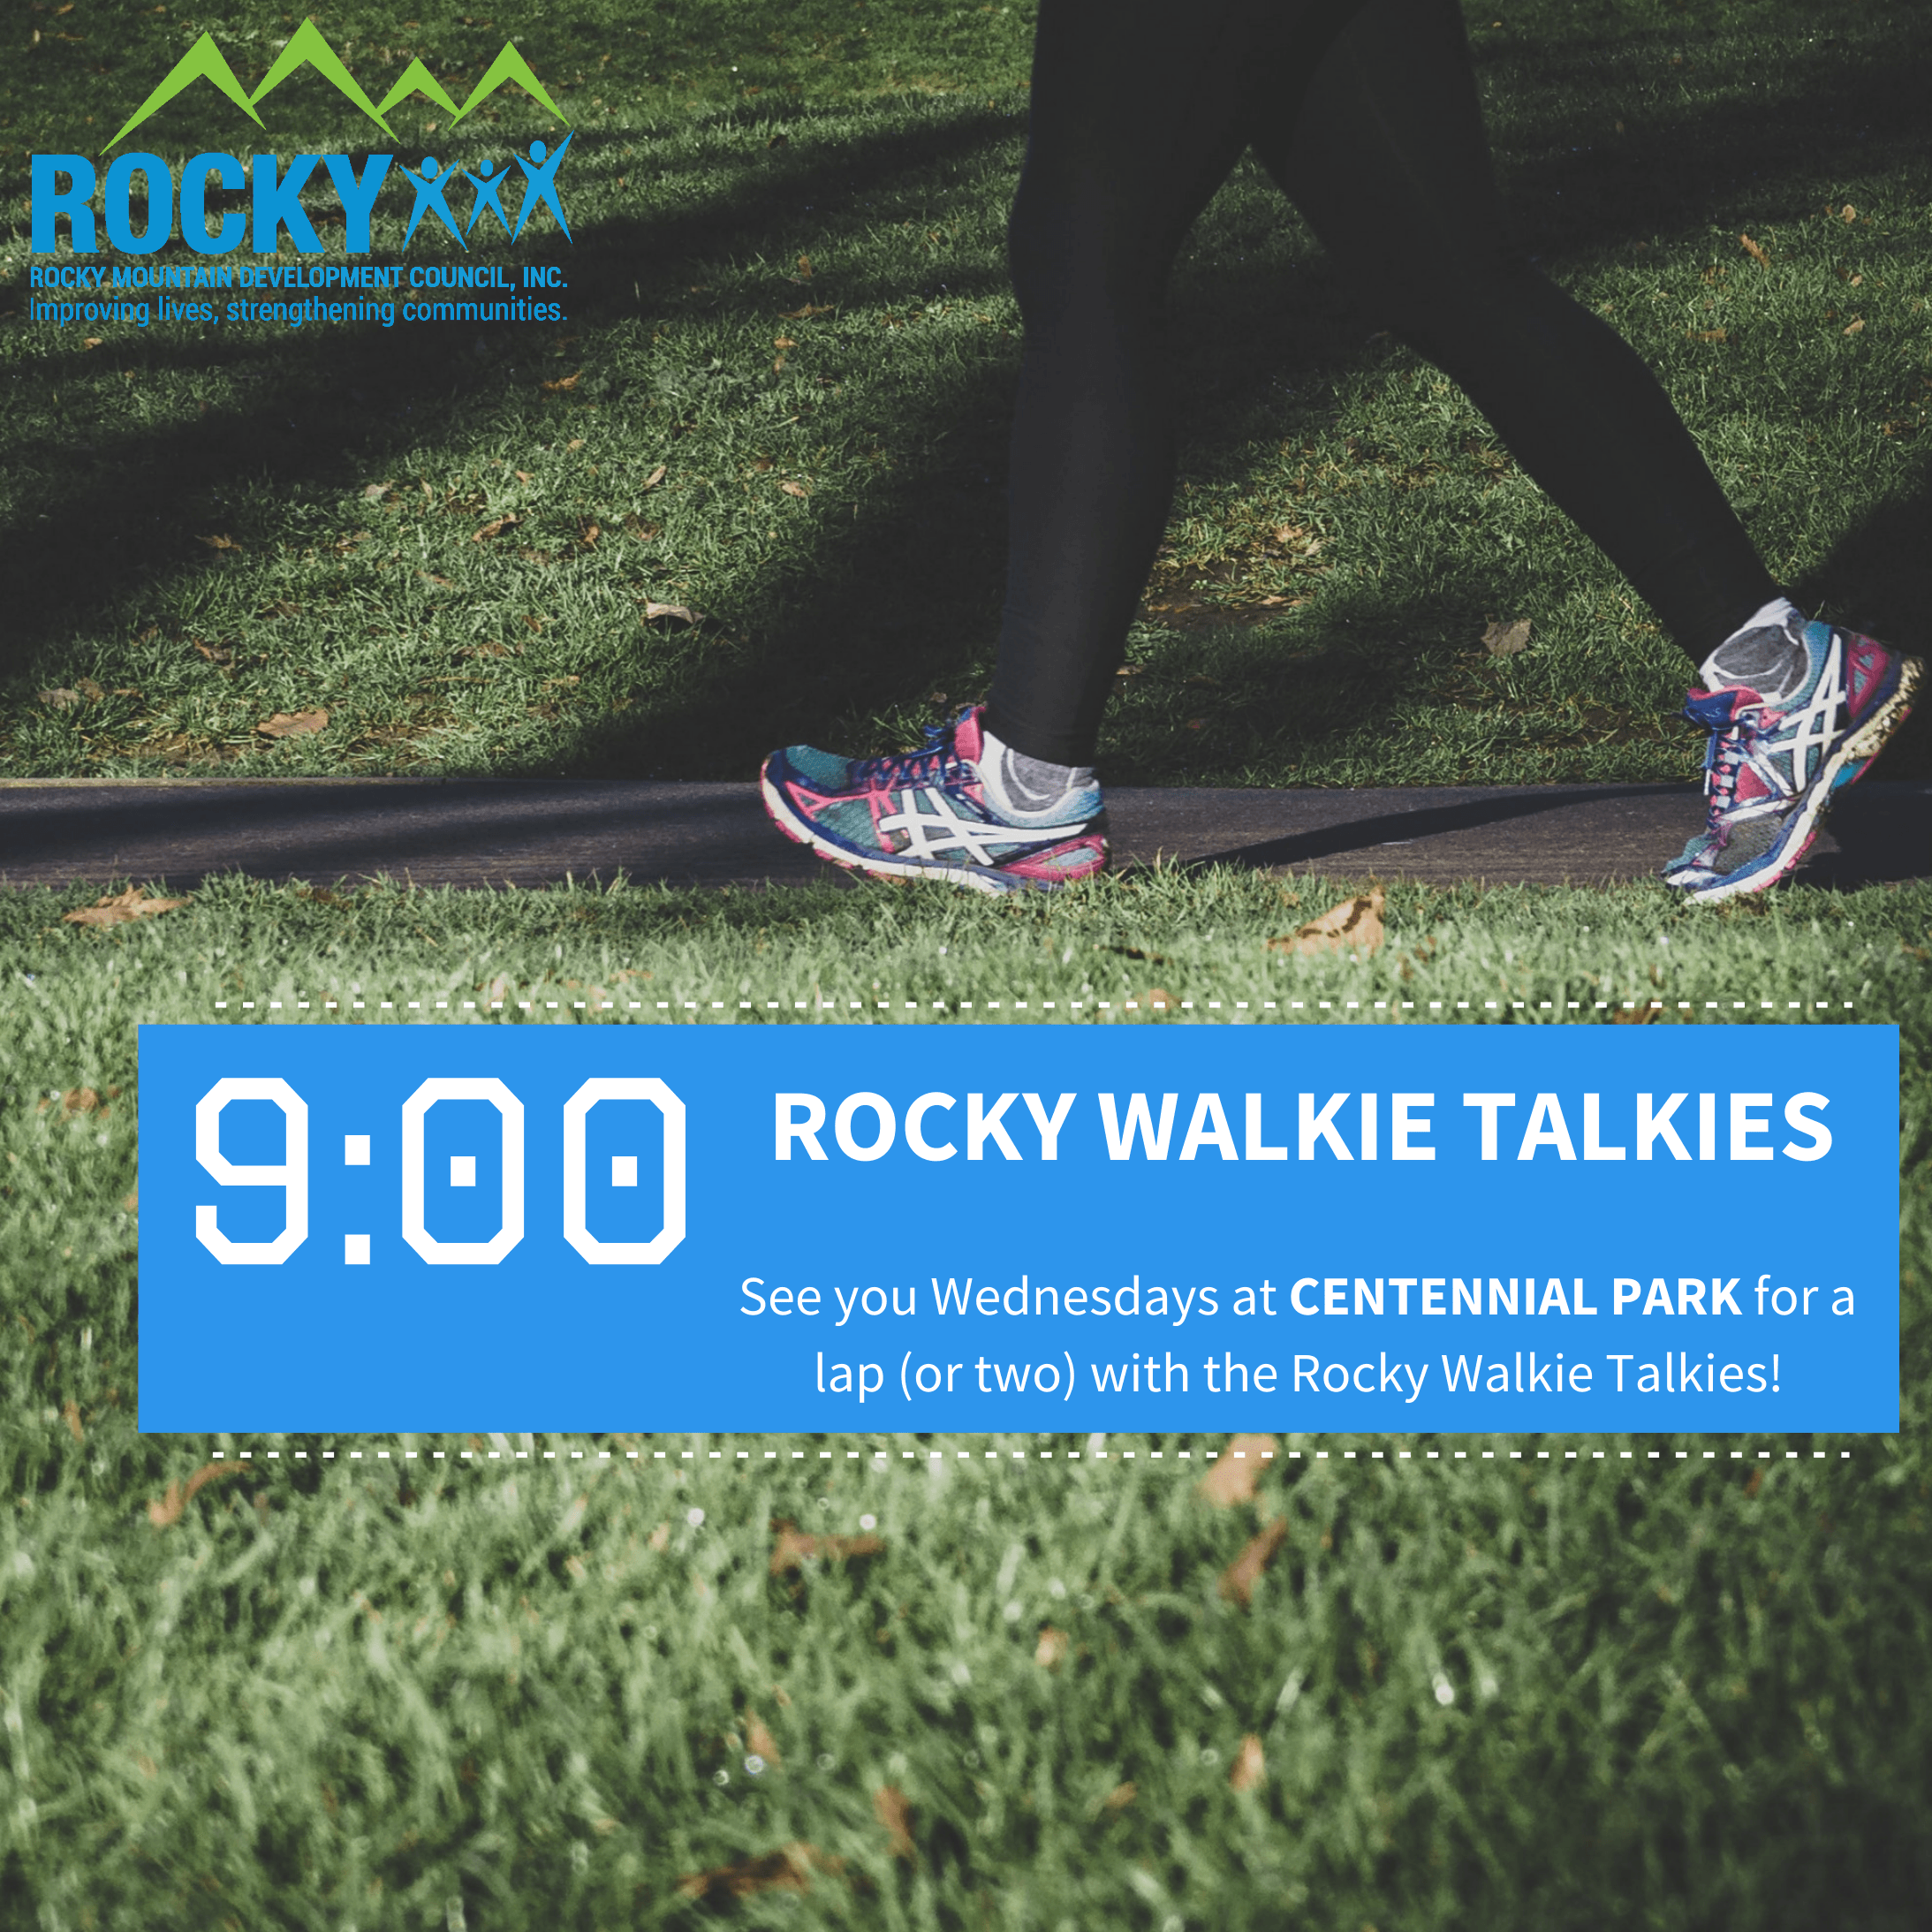 Join the Rocky Walkie Talkies on Wednesdays at 9 am